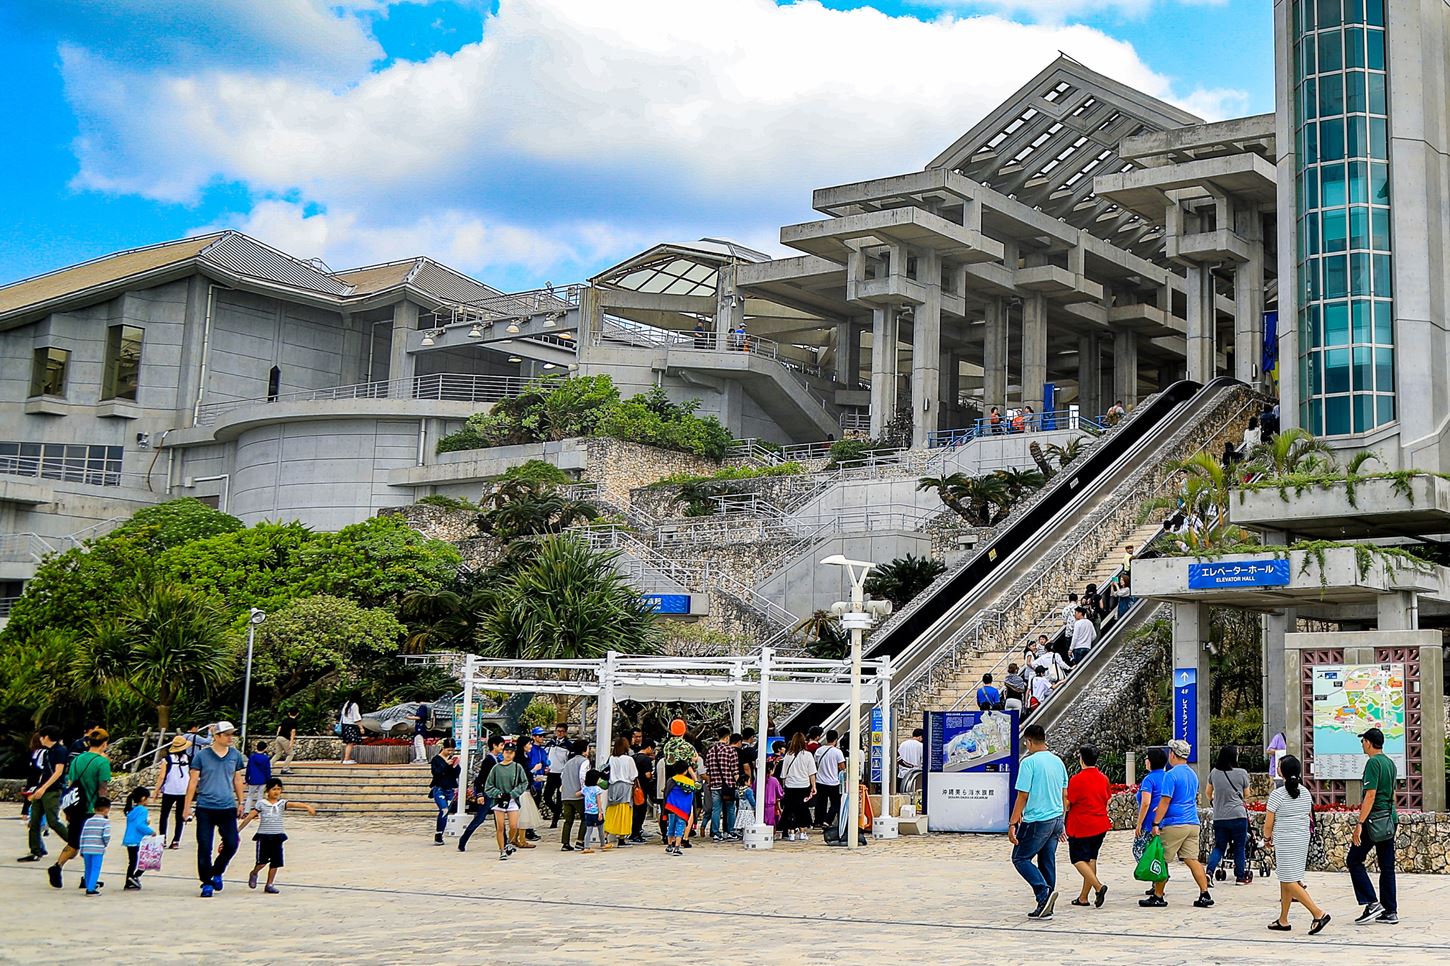 Sightseeing scenery that simply shows the weather and clothes in Okinawa in January2